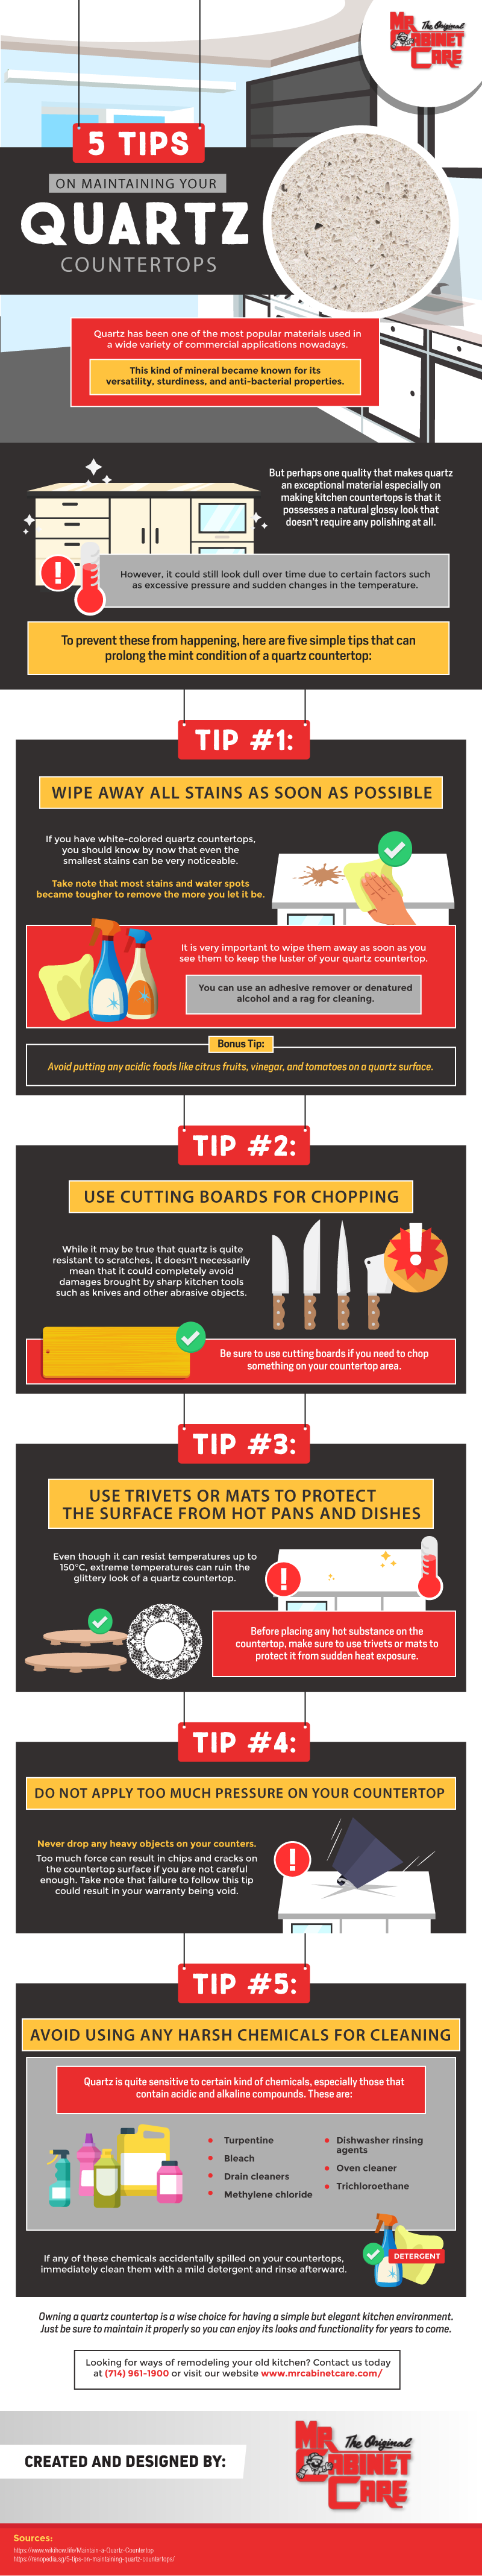 5 Tips on Maintaining Your Quartz Countertops - Infographic